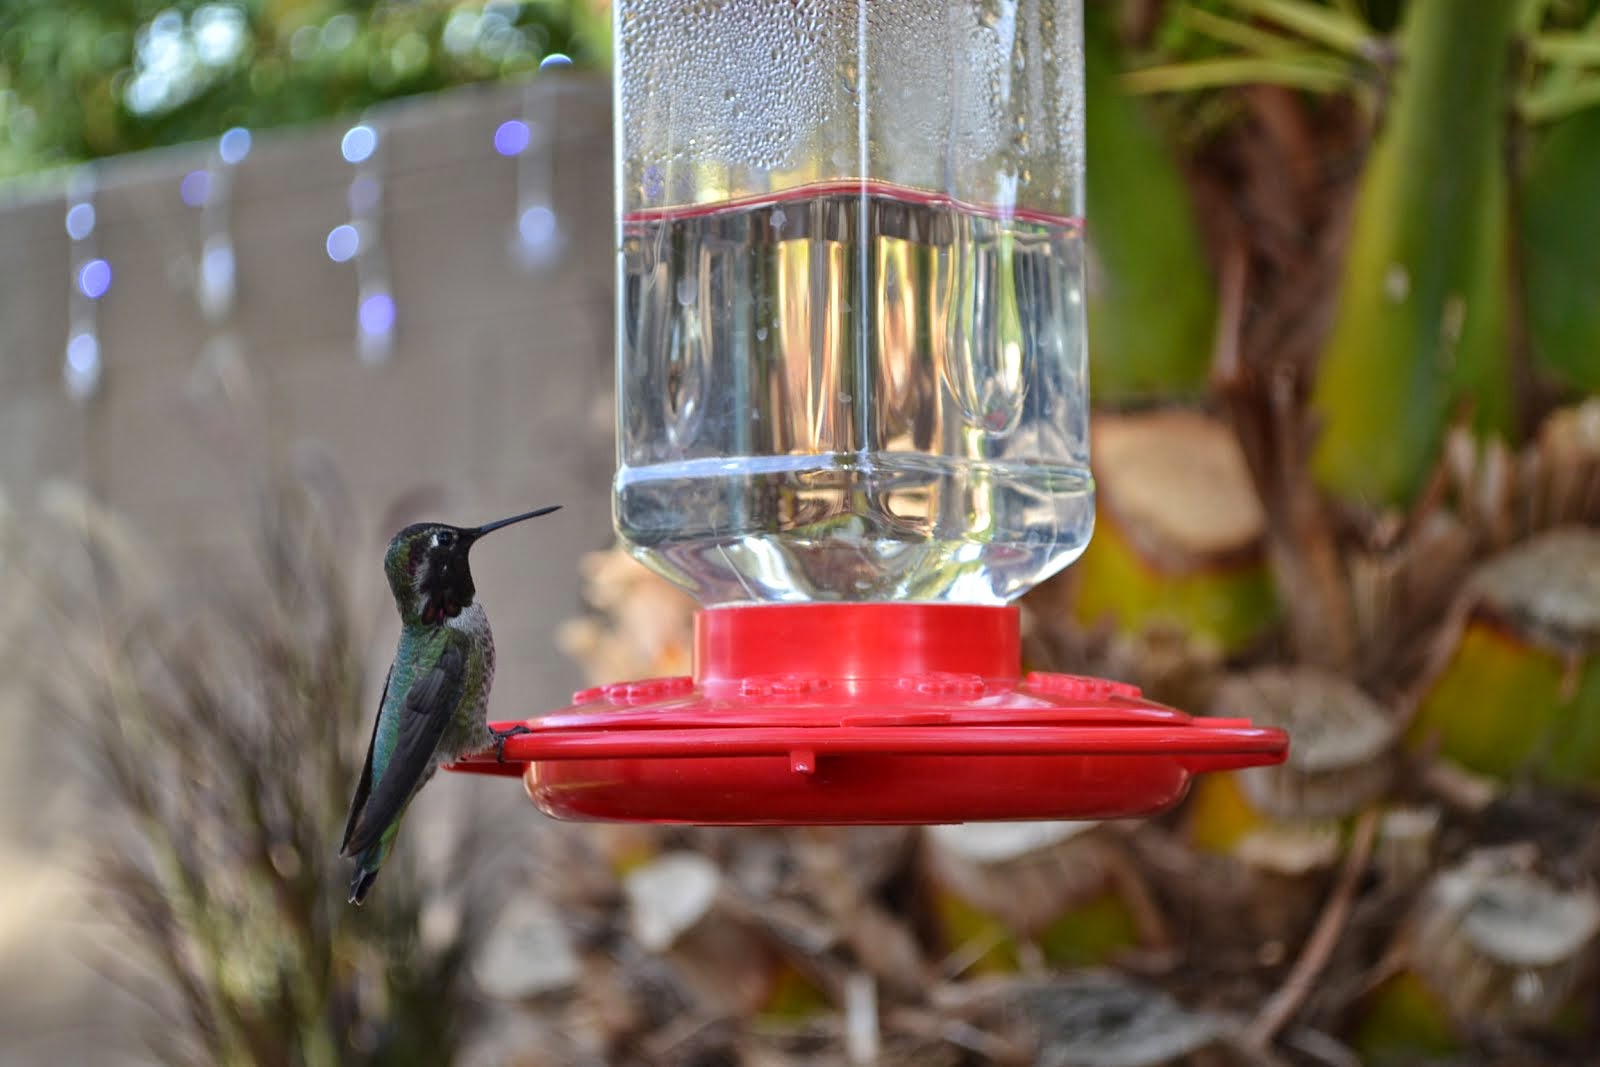 This Hummer looks Pretty Hungry!